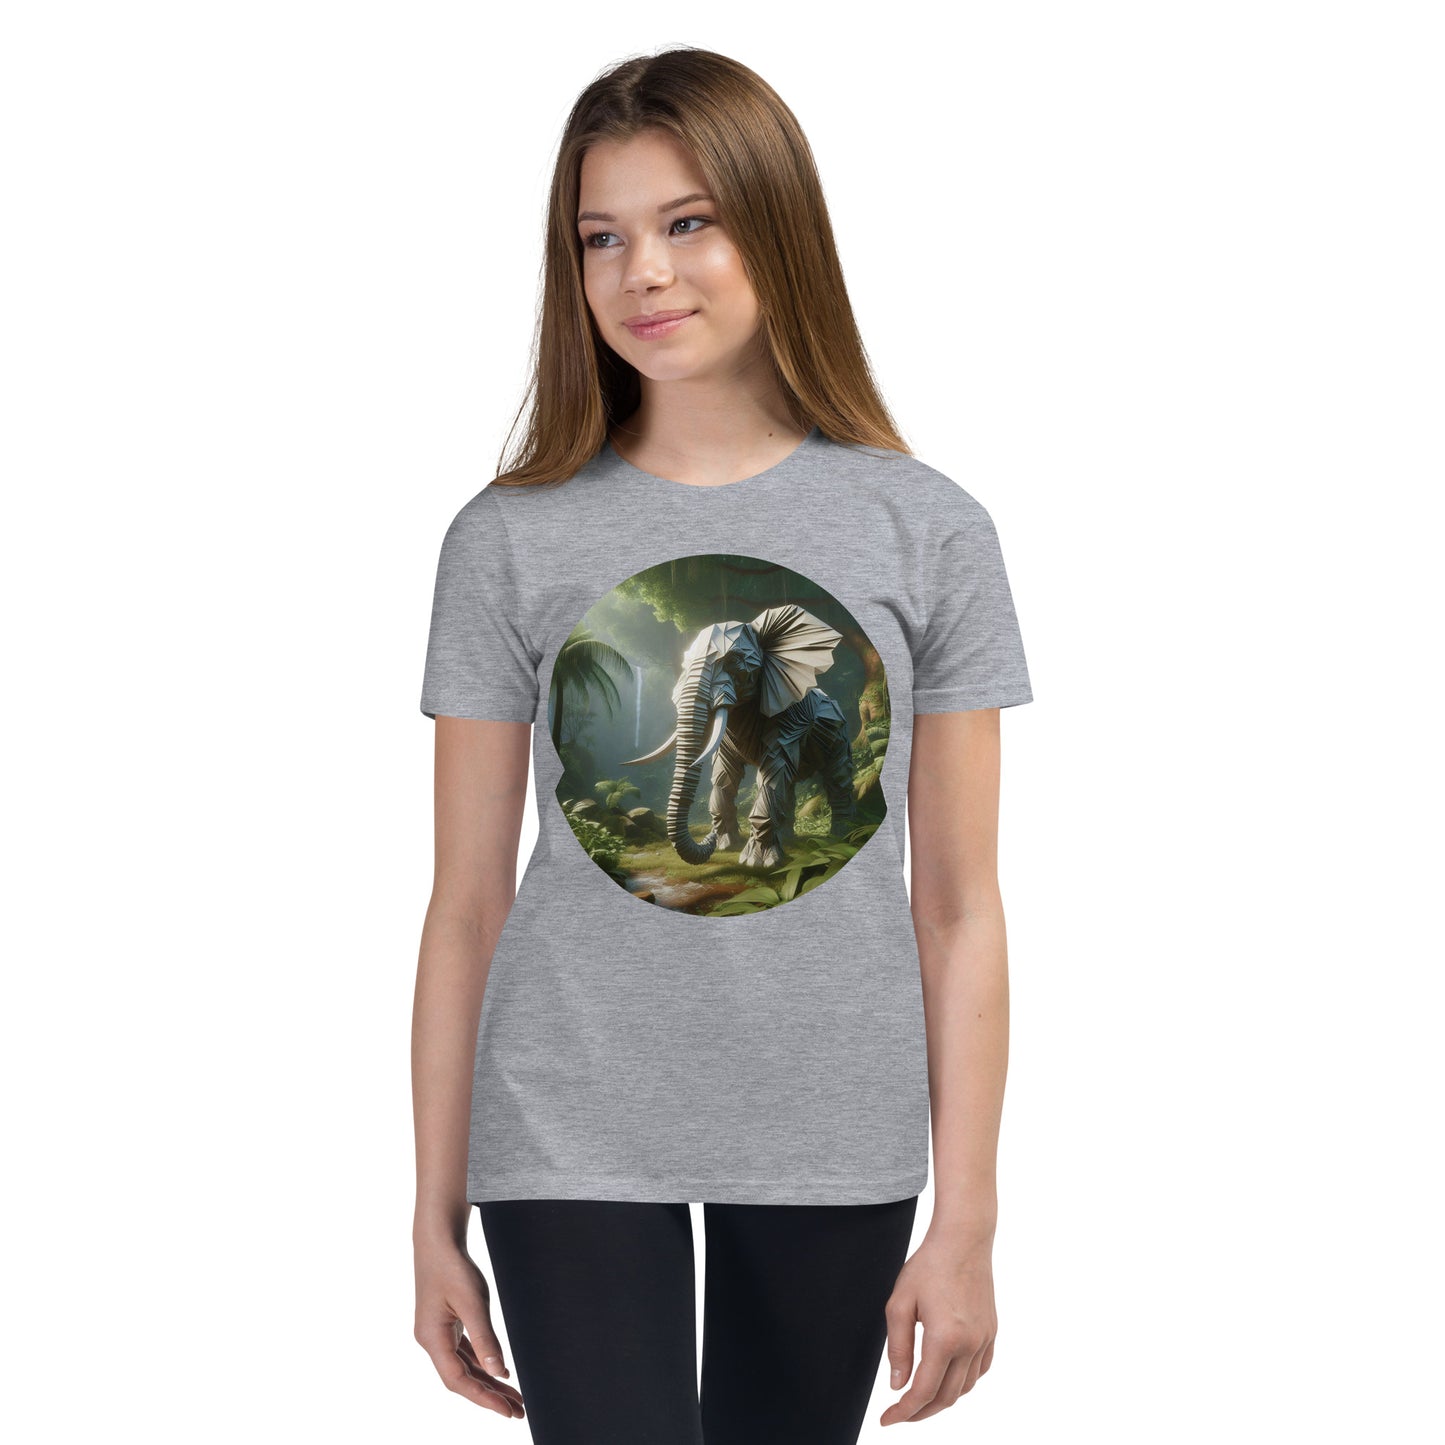 Youth with grey T-shirt with a print of a Elephant in the woud